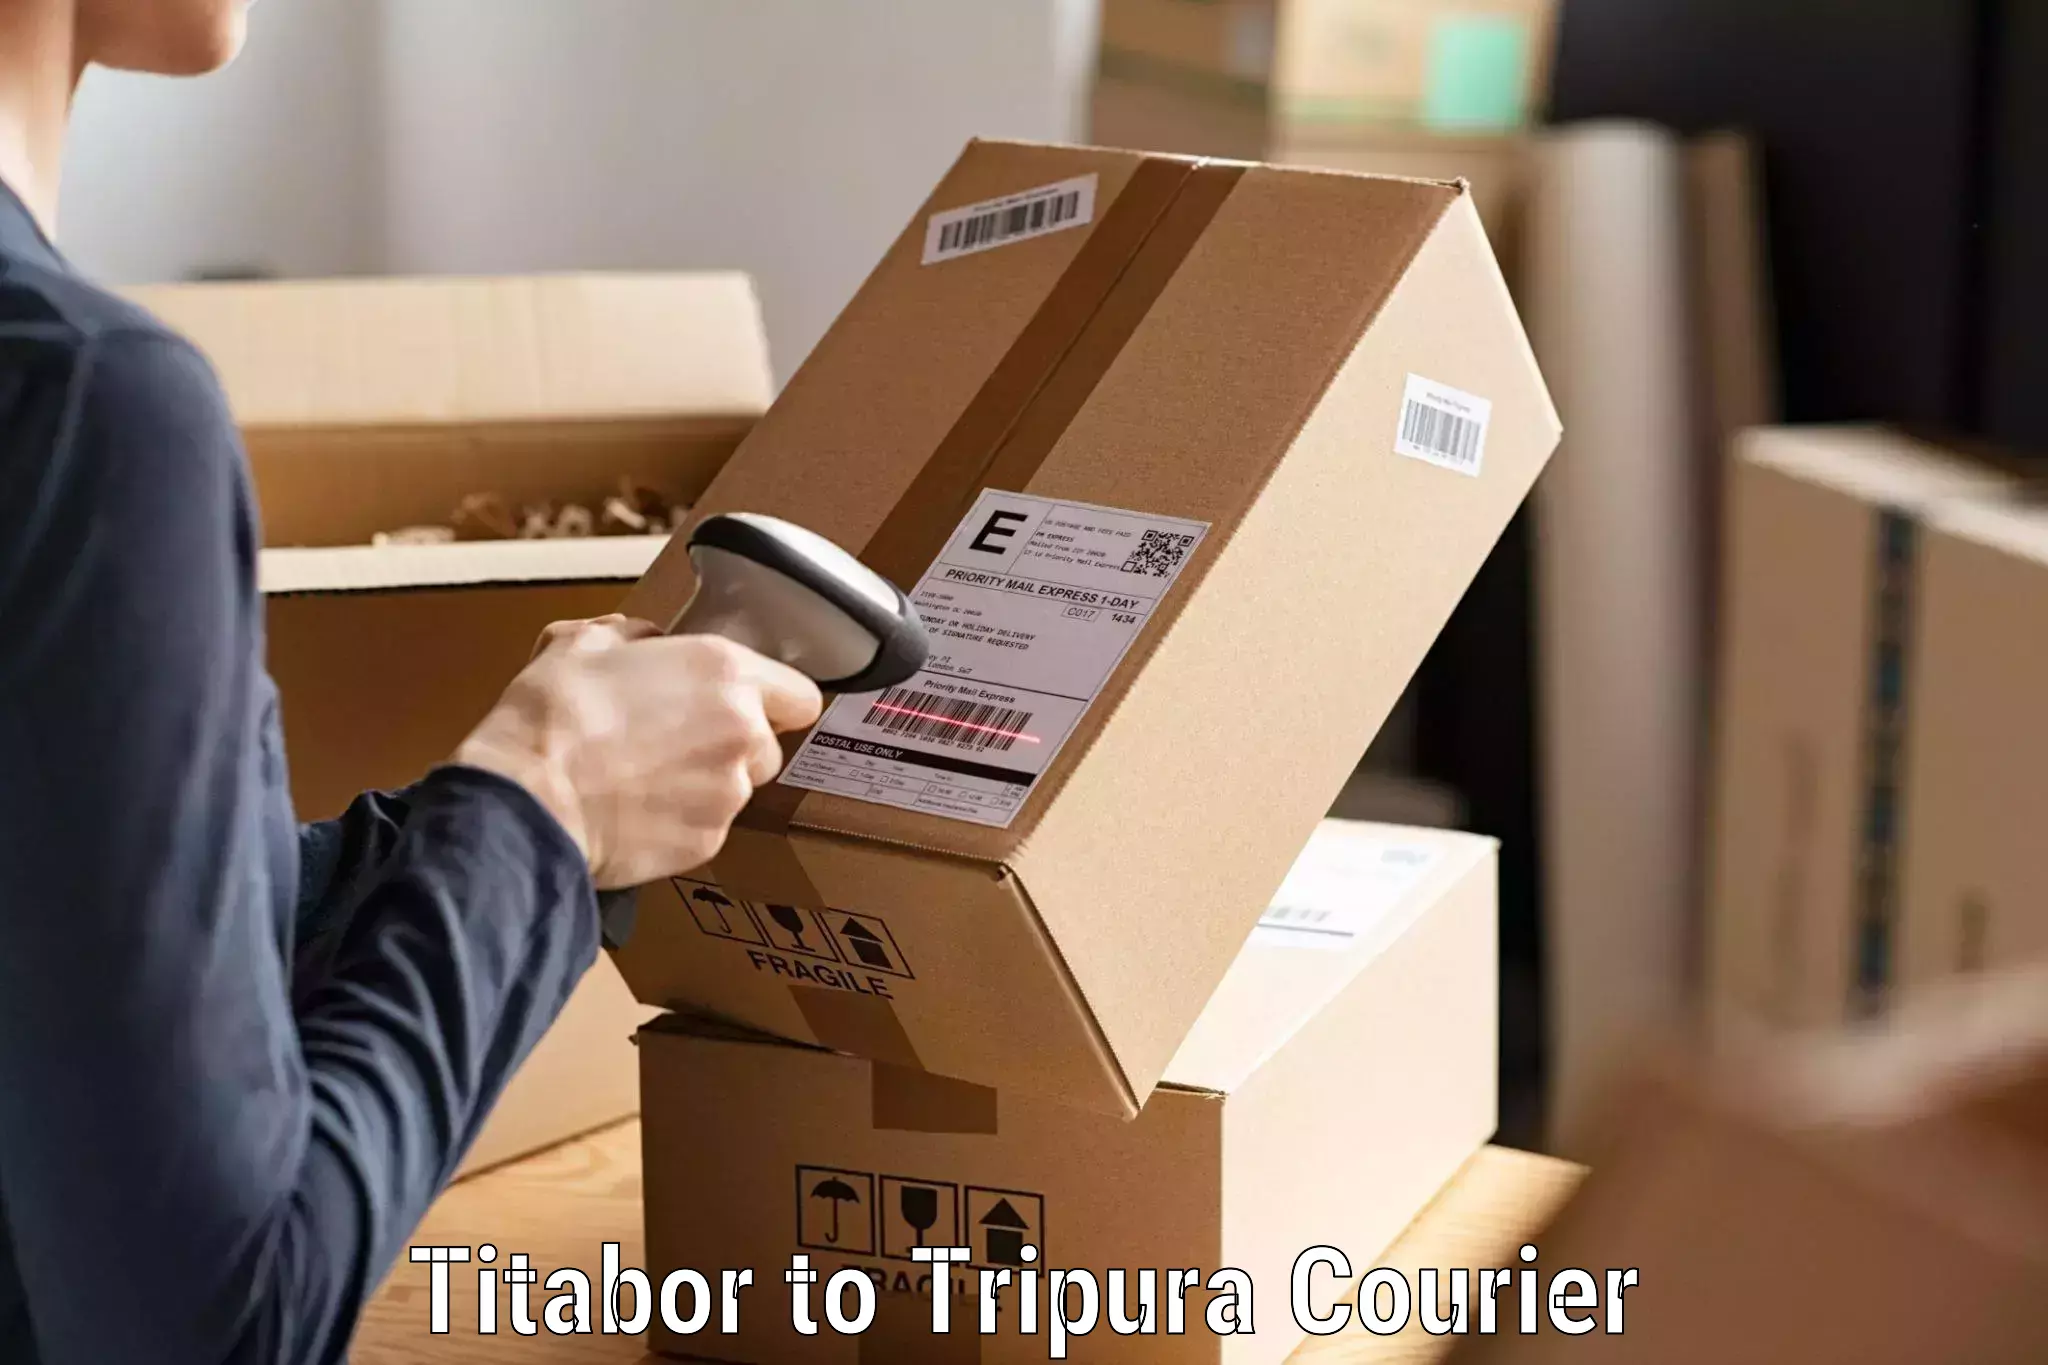 Reliable courier service Titabor to Tripura